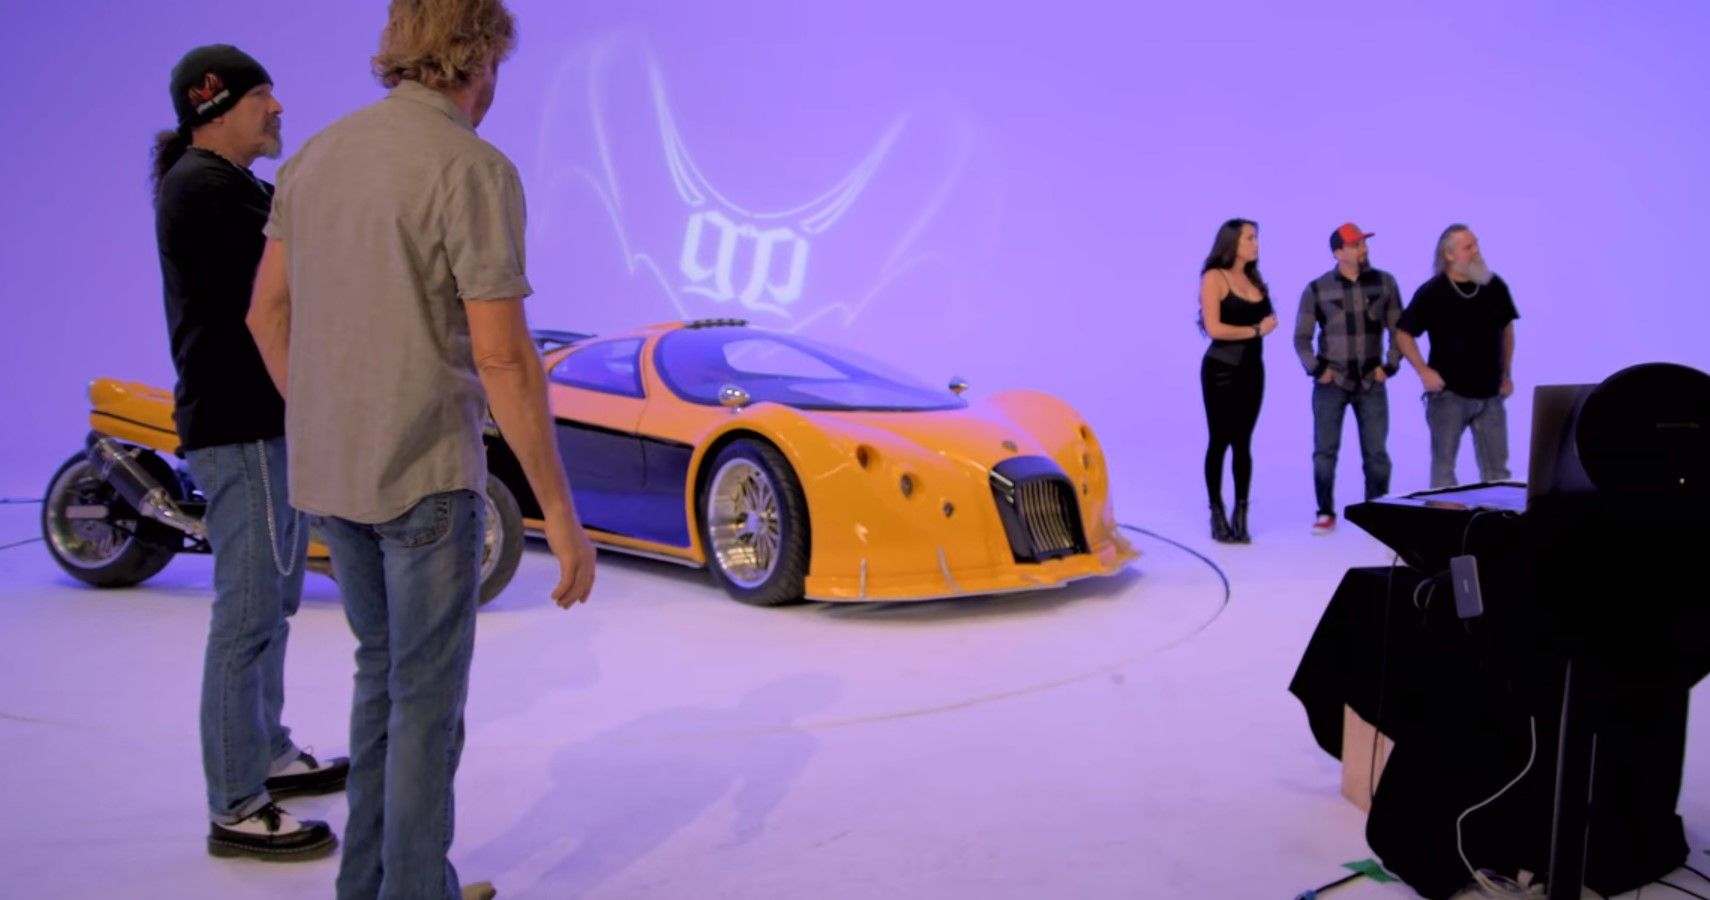 The Concept car and bike at Gotham Garage's online auction